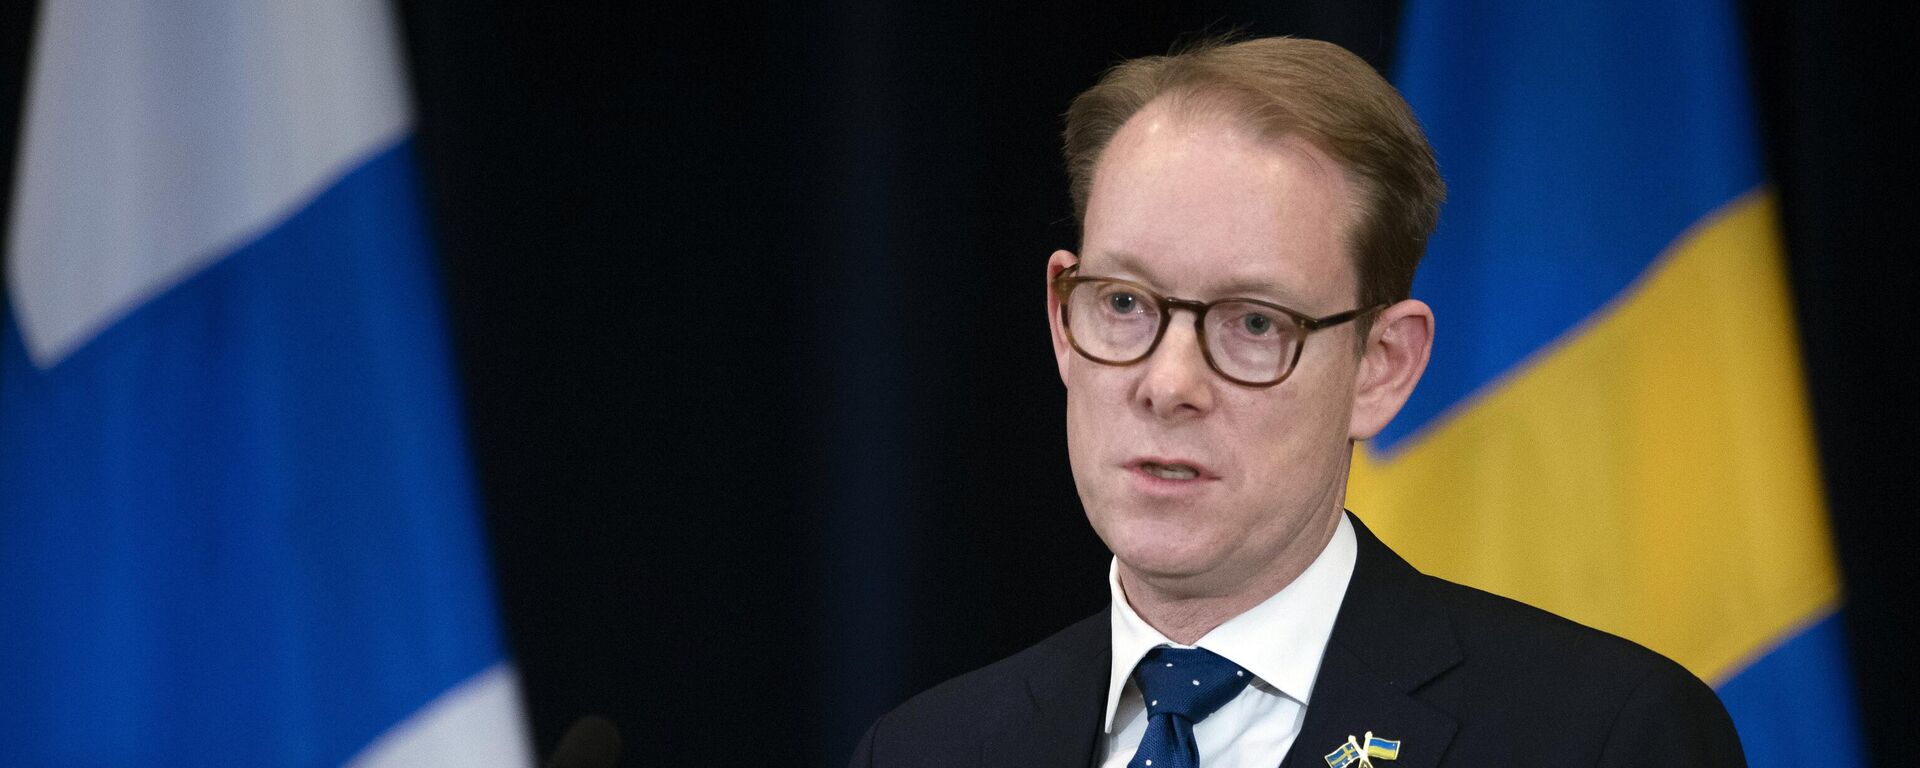 Swedish Foreign Minister Tobias Billstrom speaks during a news conference at the State Department, in Washington, Thursday, Dec. 8, 2022. - Sputnik International, 1920, 31.03.2023